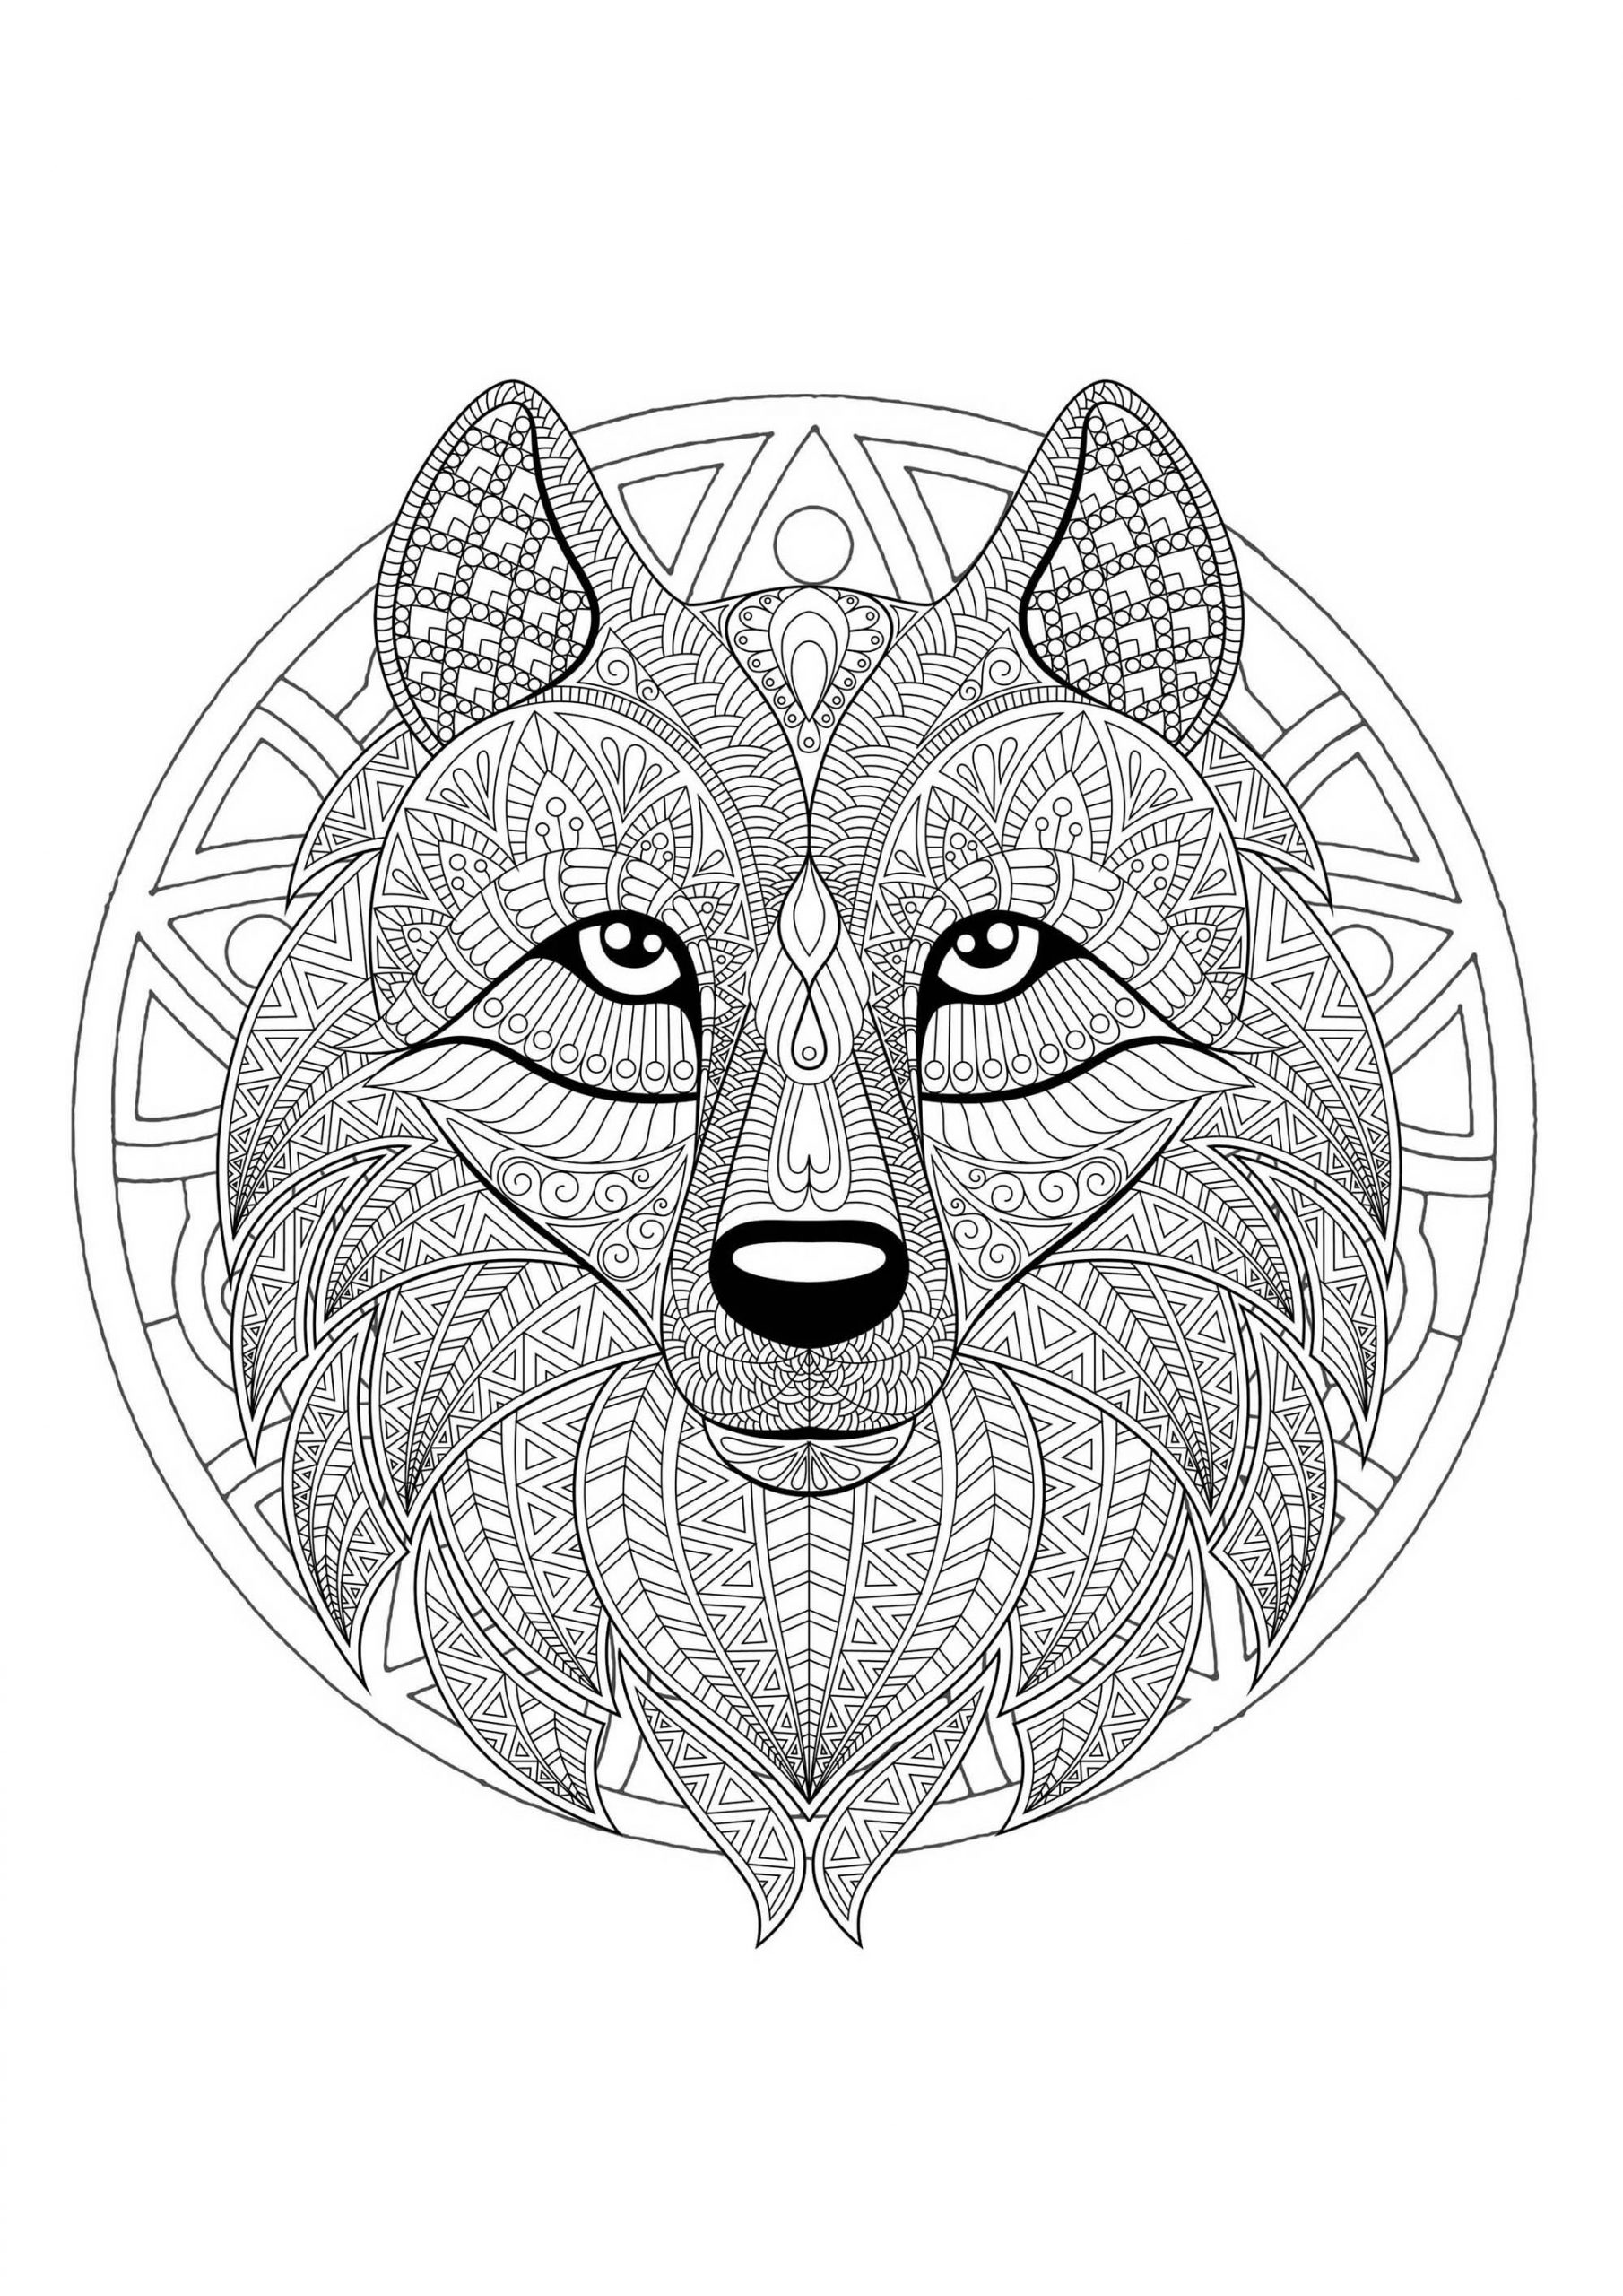 Complex Mandala Coloring Page With Complex Wolf Head 2 à Coloriage Mandala